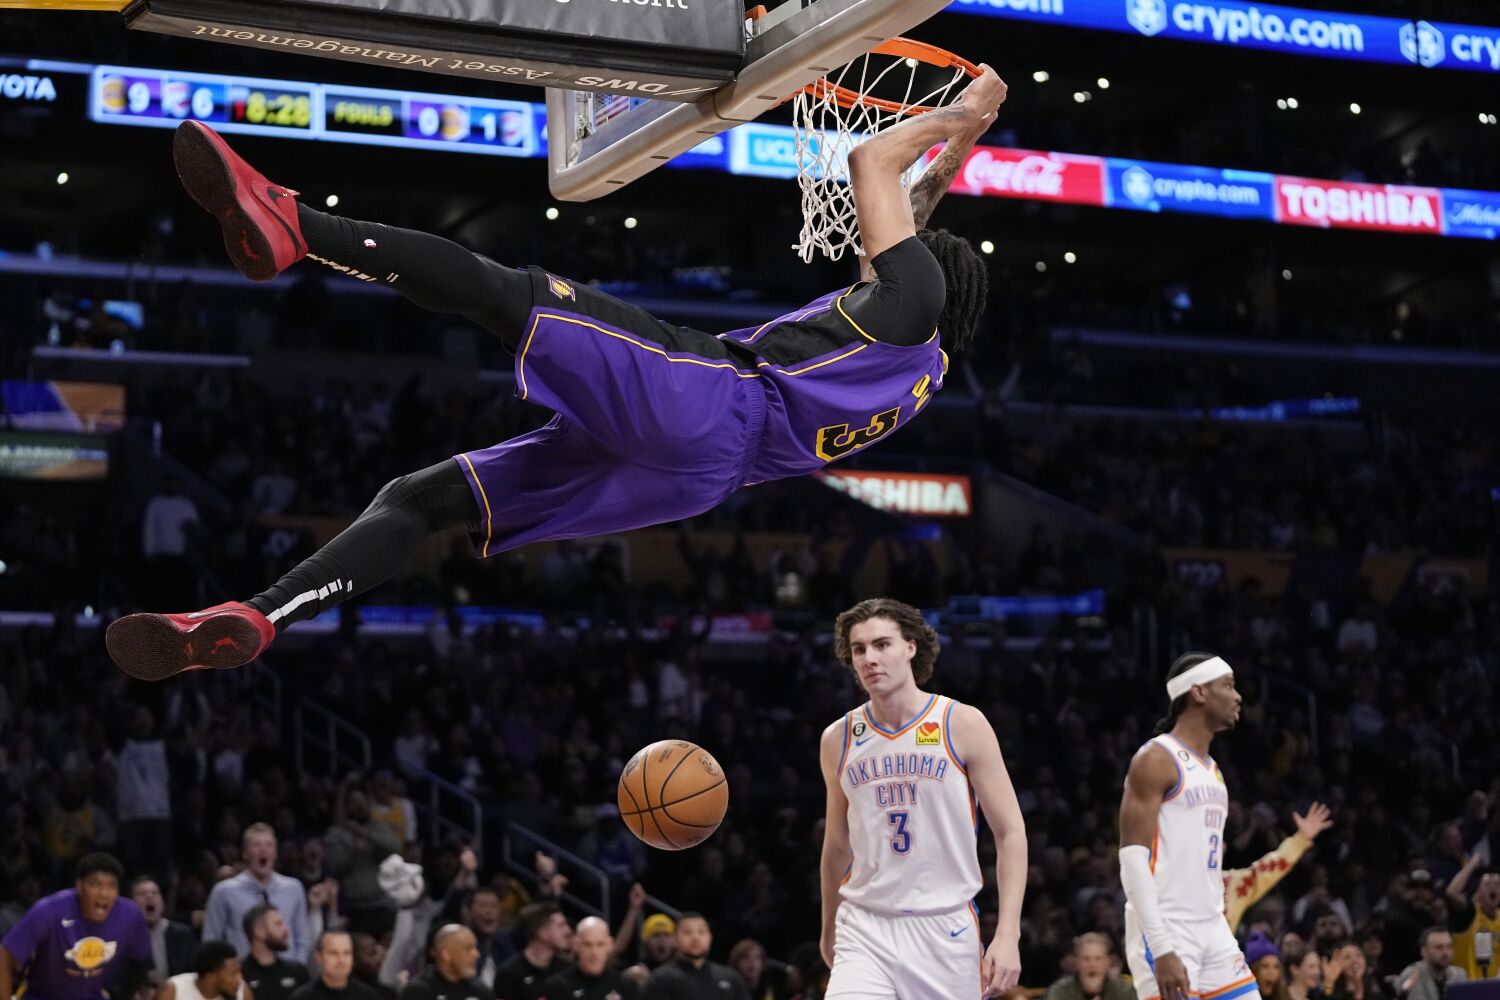 Lakers hold on to defeat Thunder, reach .500 mark for first time this season